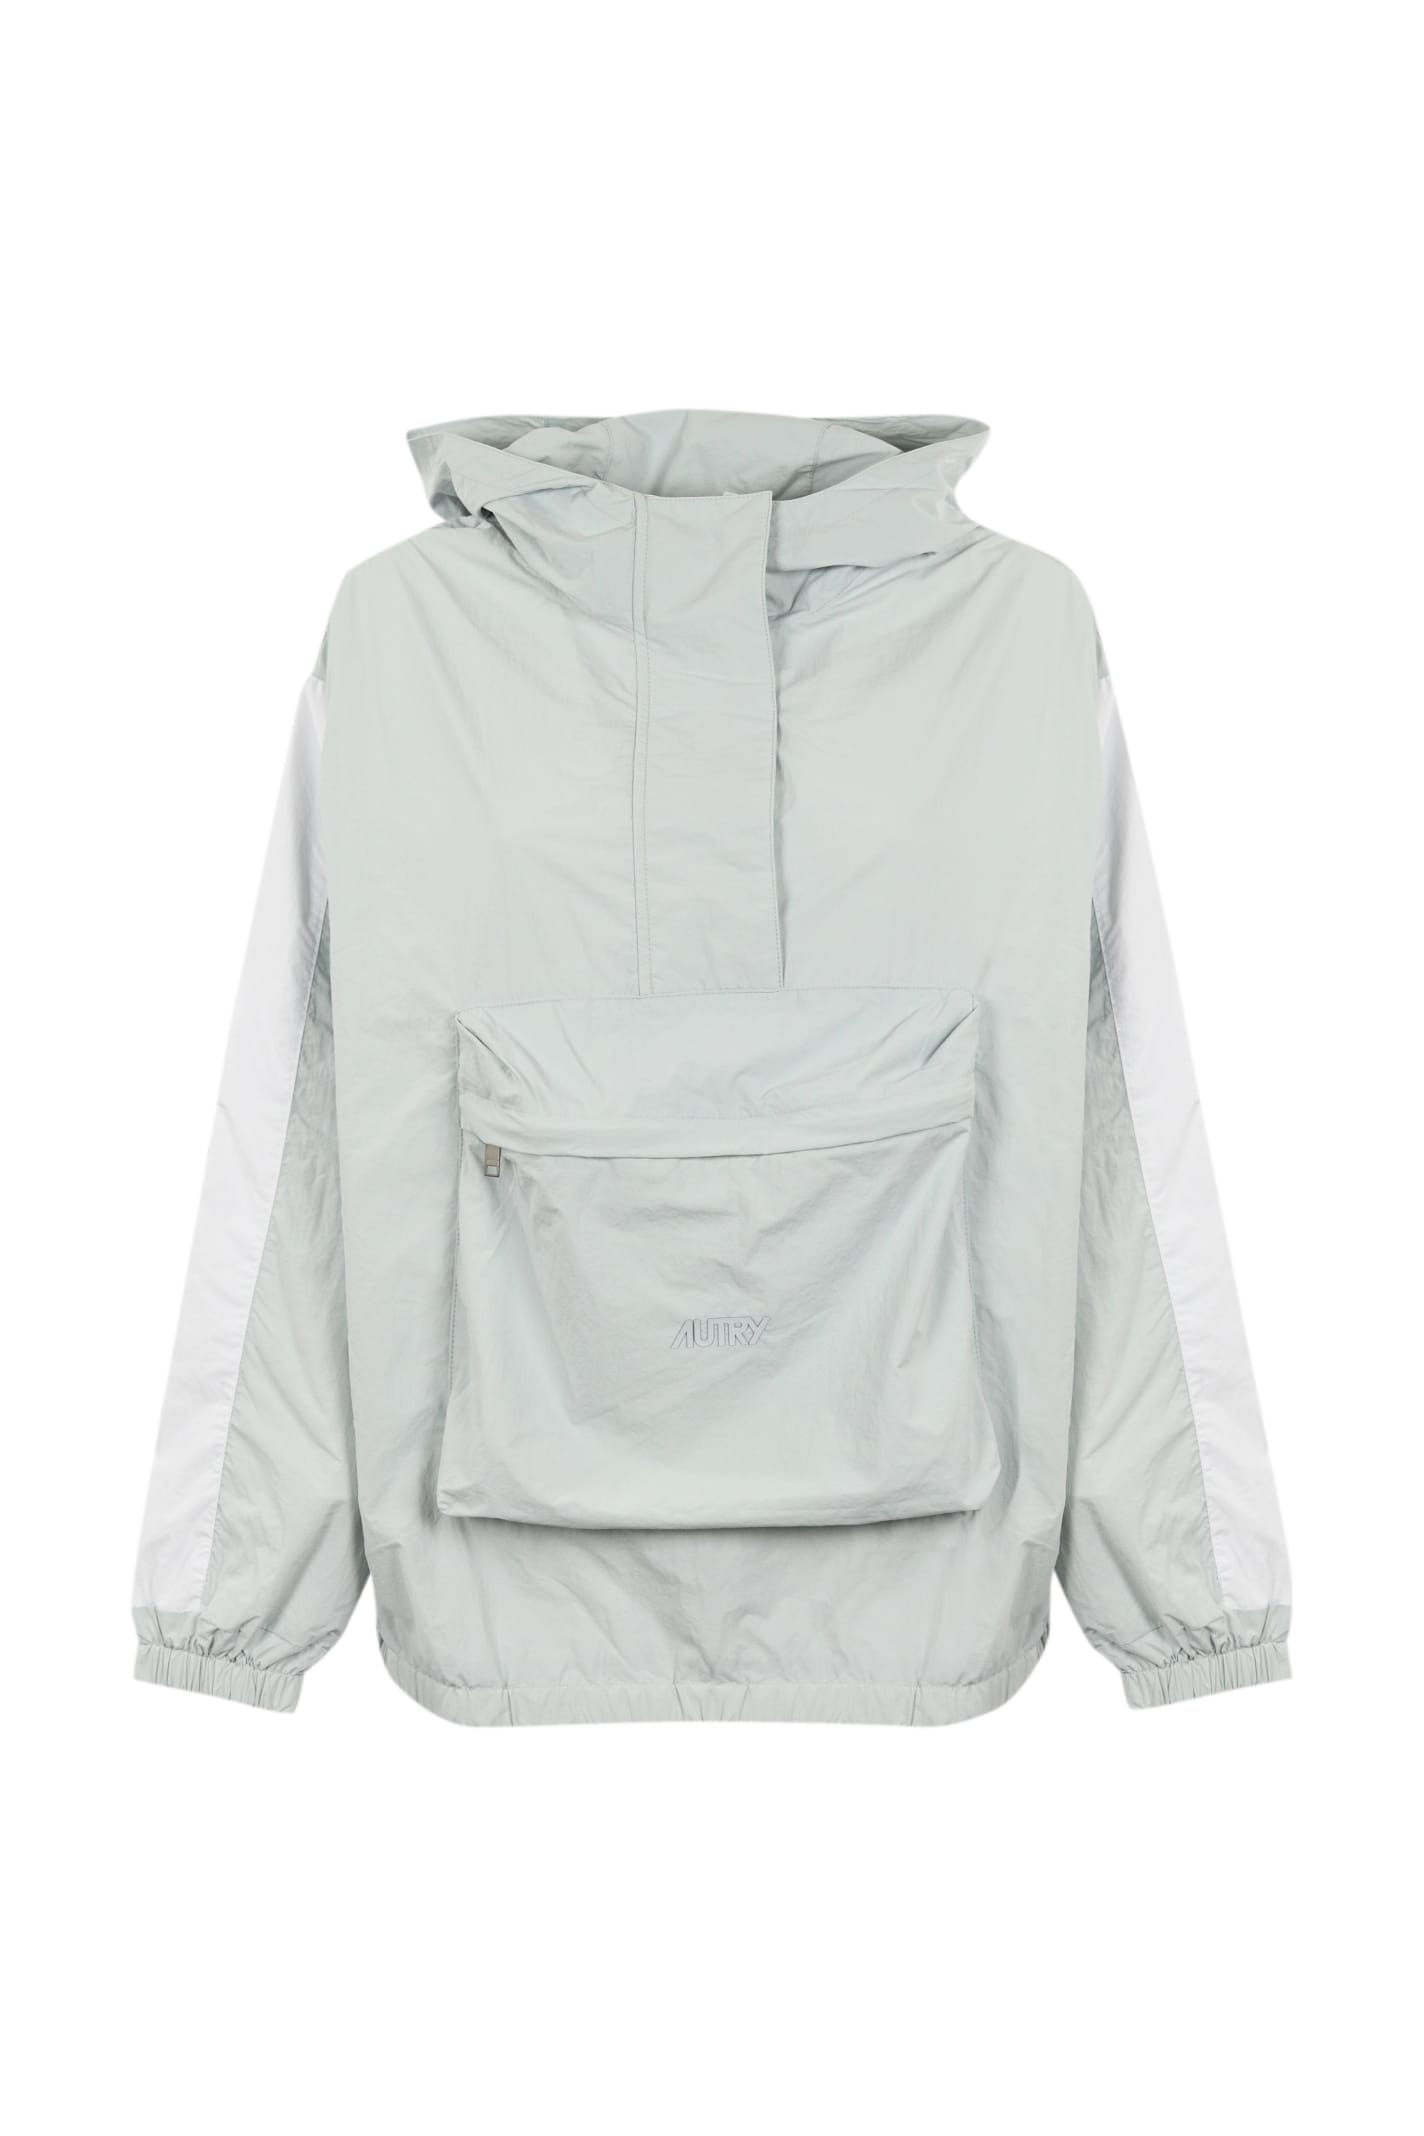 AUTRY JACKET IN LIGHT BLUE TECHNICAL FABRIC